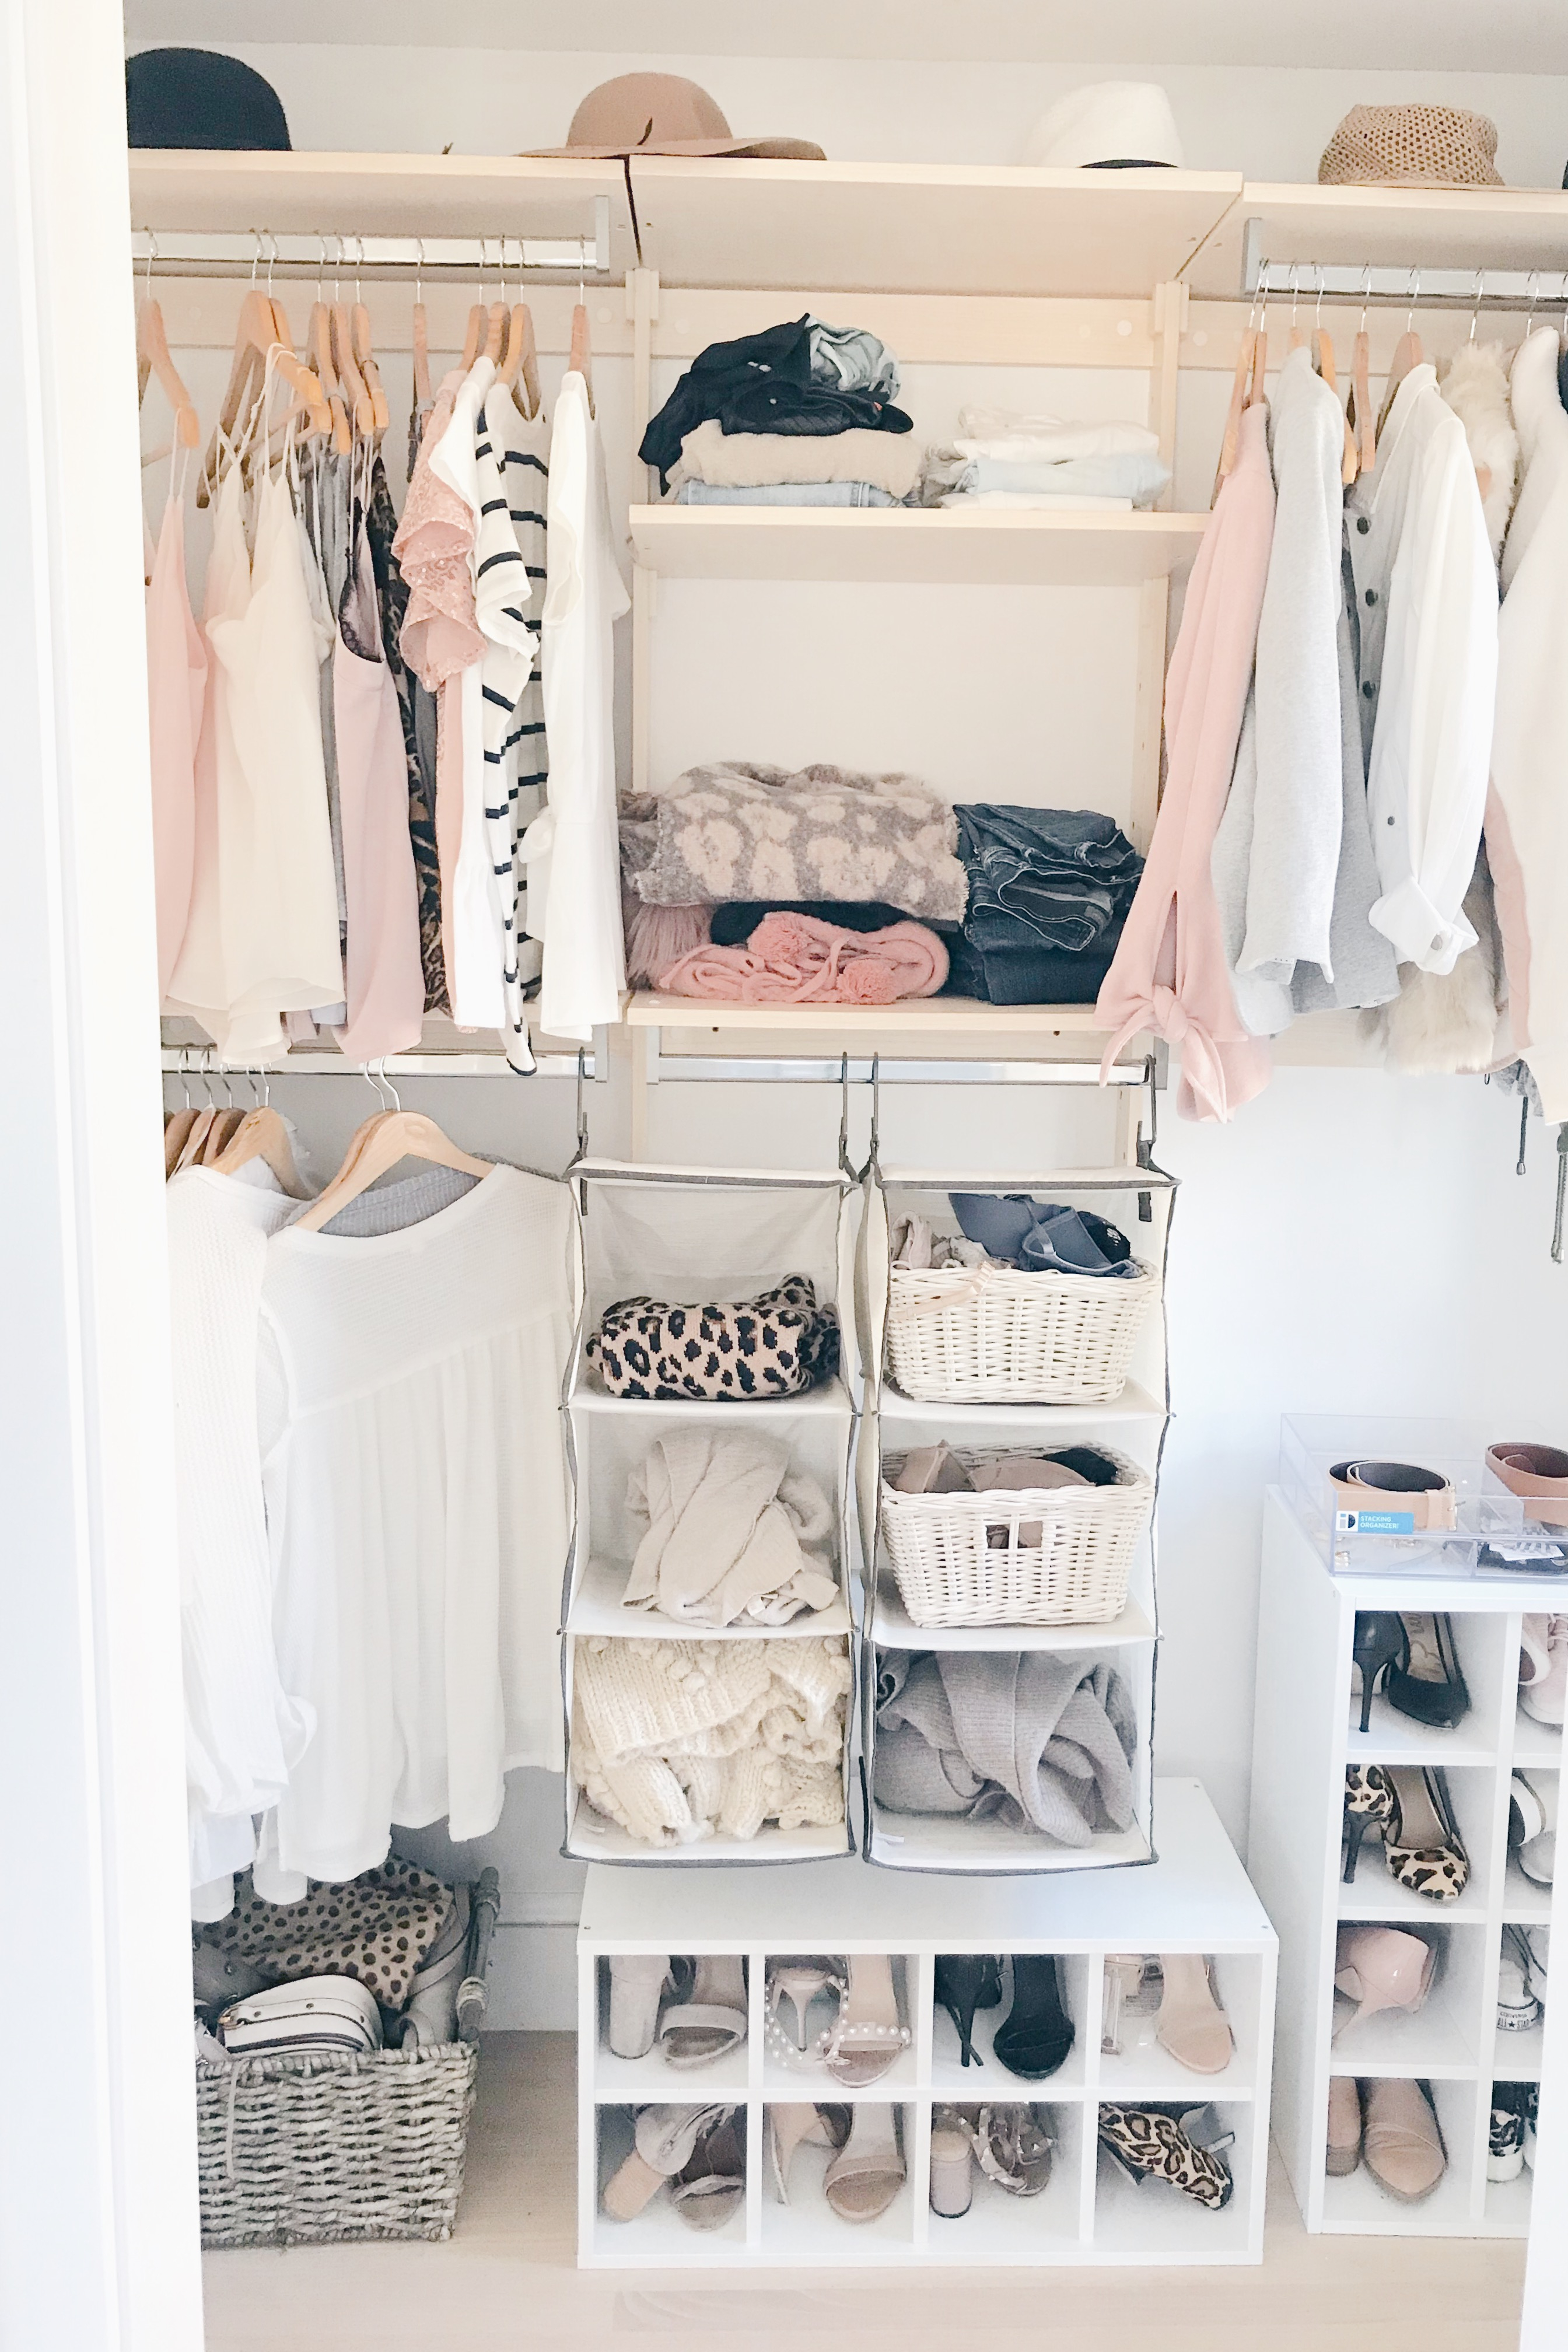  gifts to get organized in 2019 - closet organization